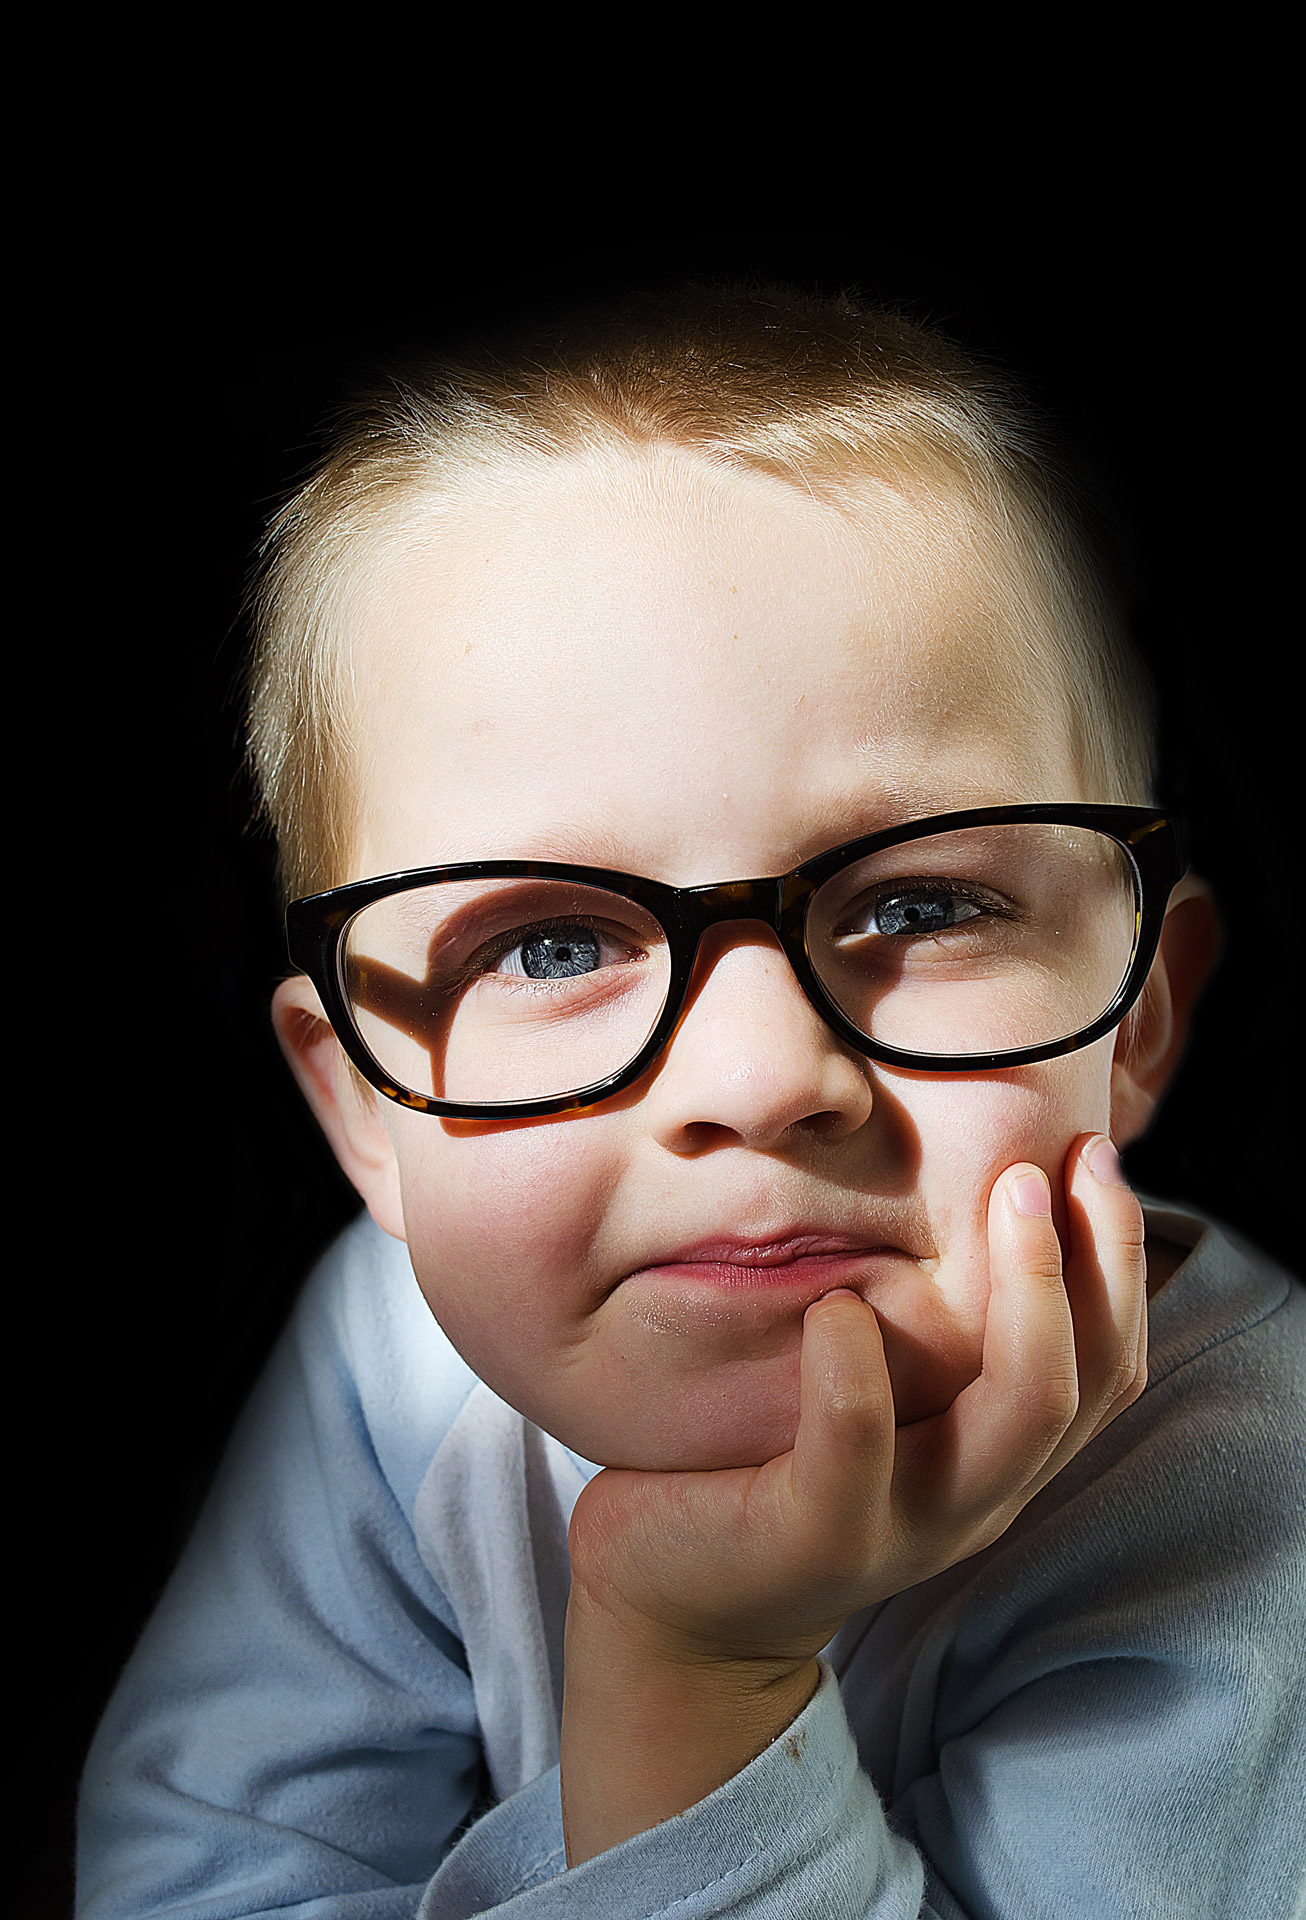 Child And Optical Glasses